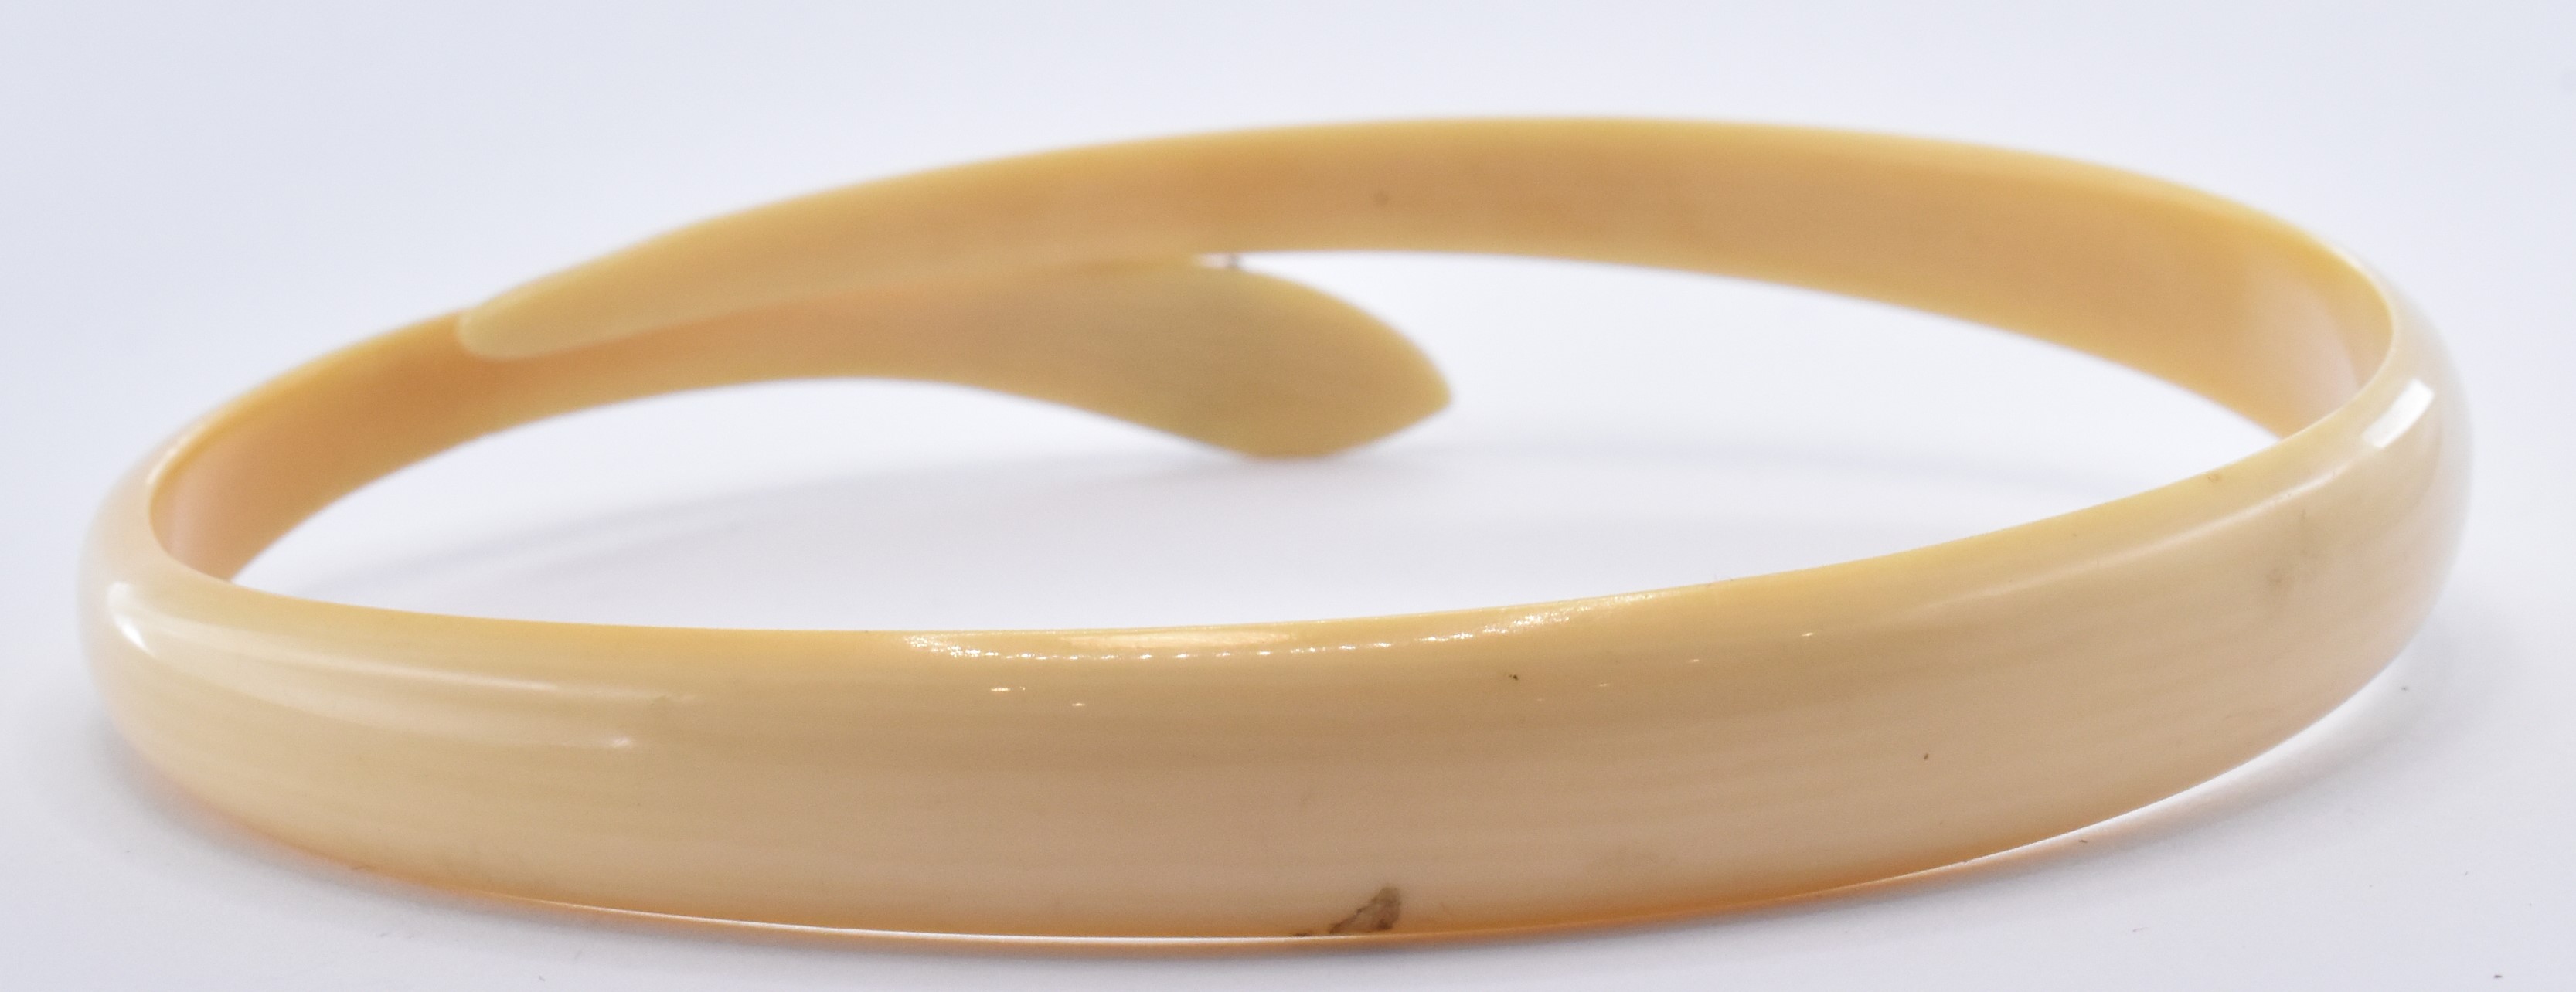 1930S ART DECO CELLULOID SNAKE CUFF BANGLE - Image 3 of 5